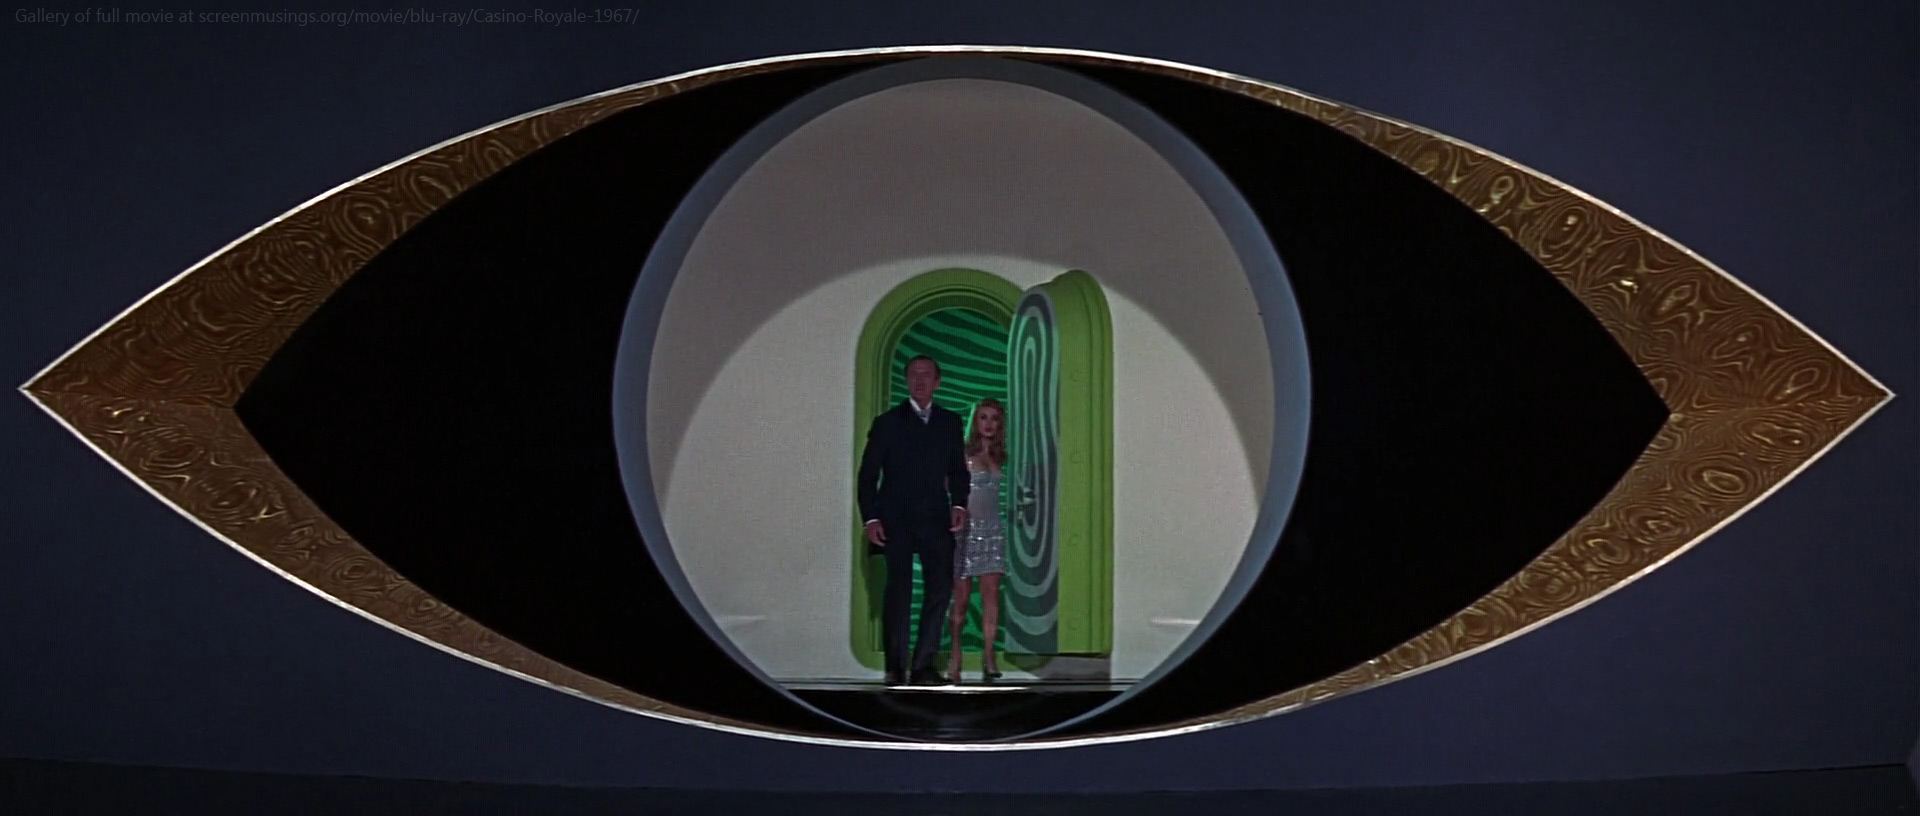 psychedelic imagery in Casino Royale